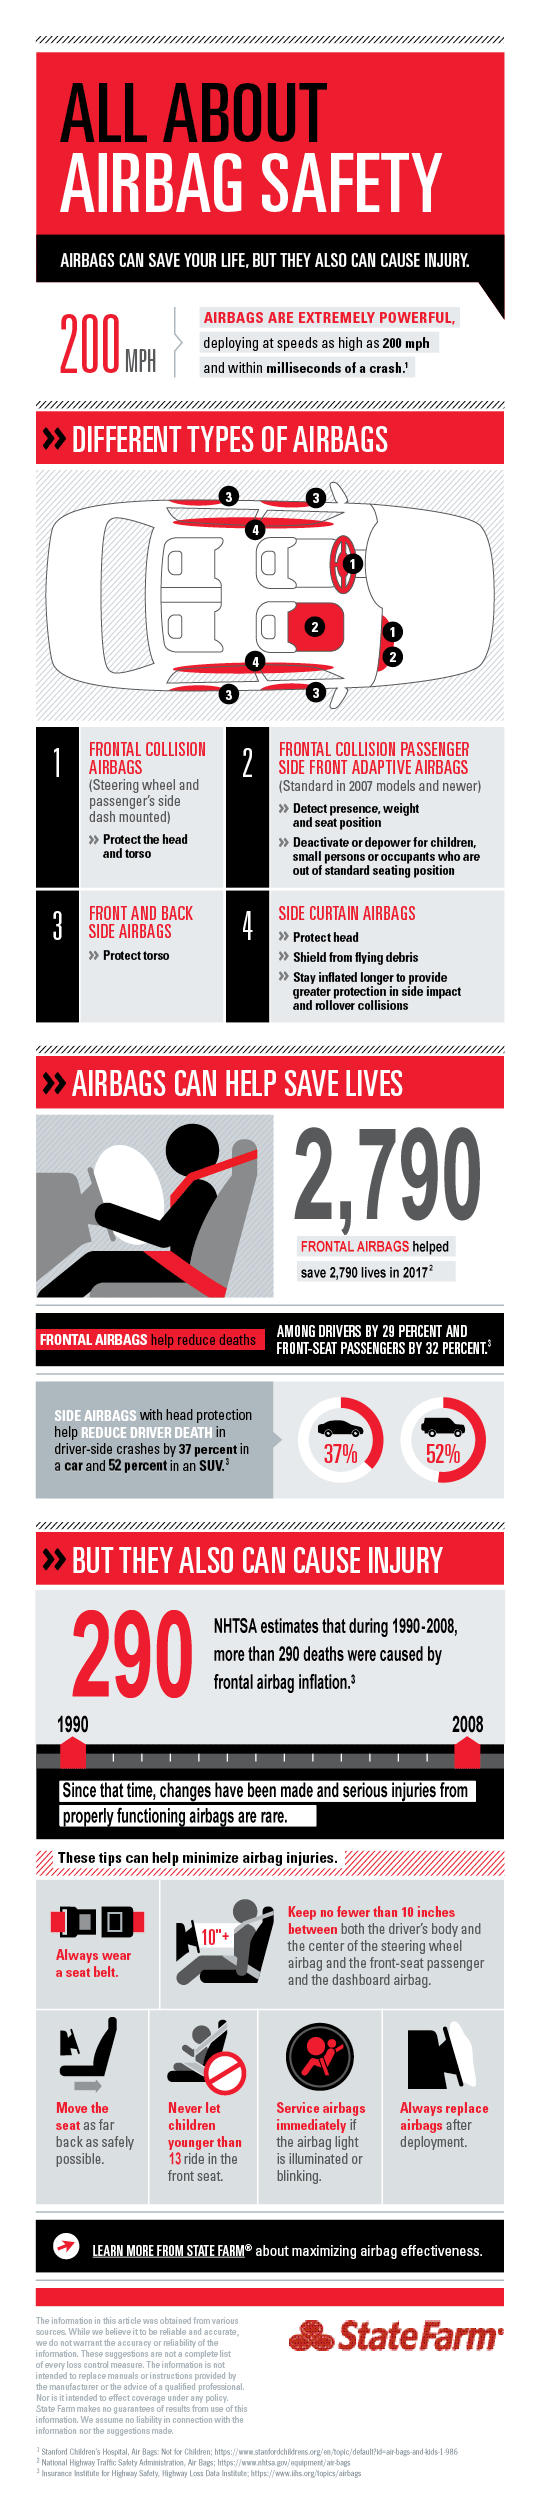 242-infographic-airbag-safety